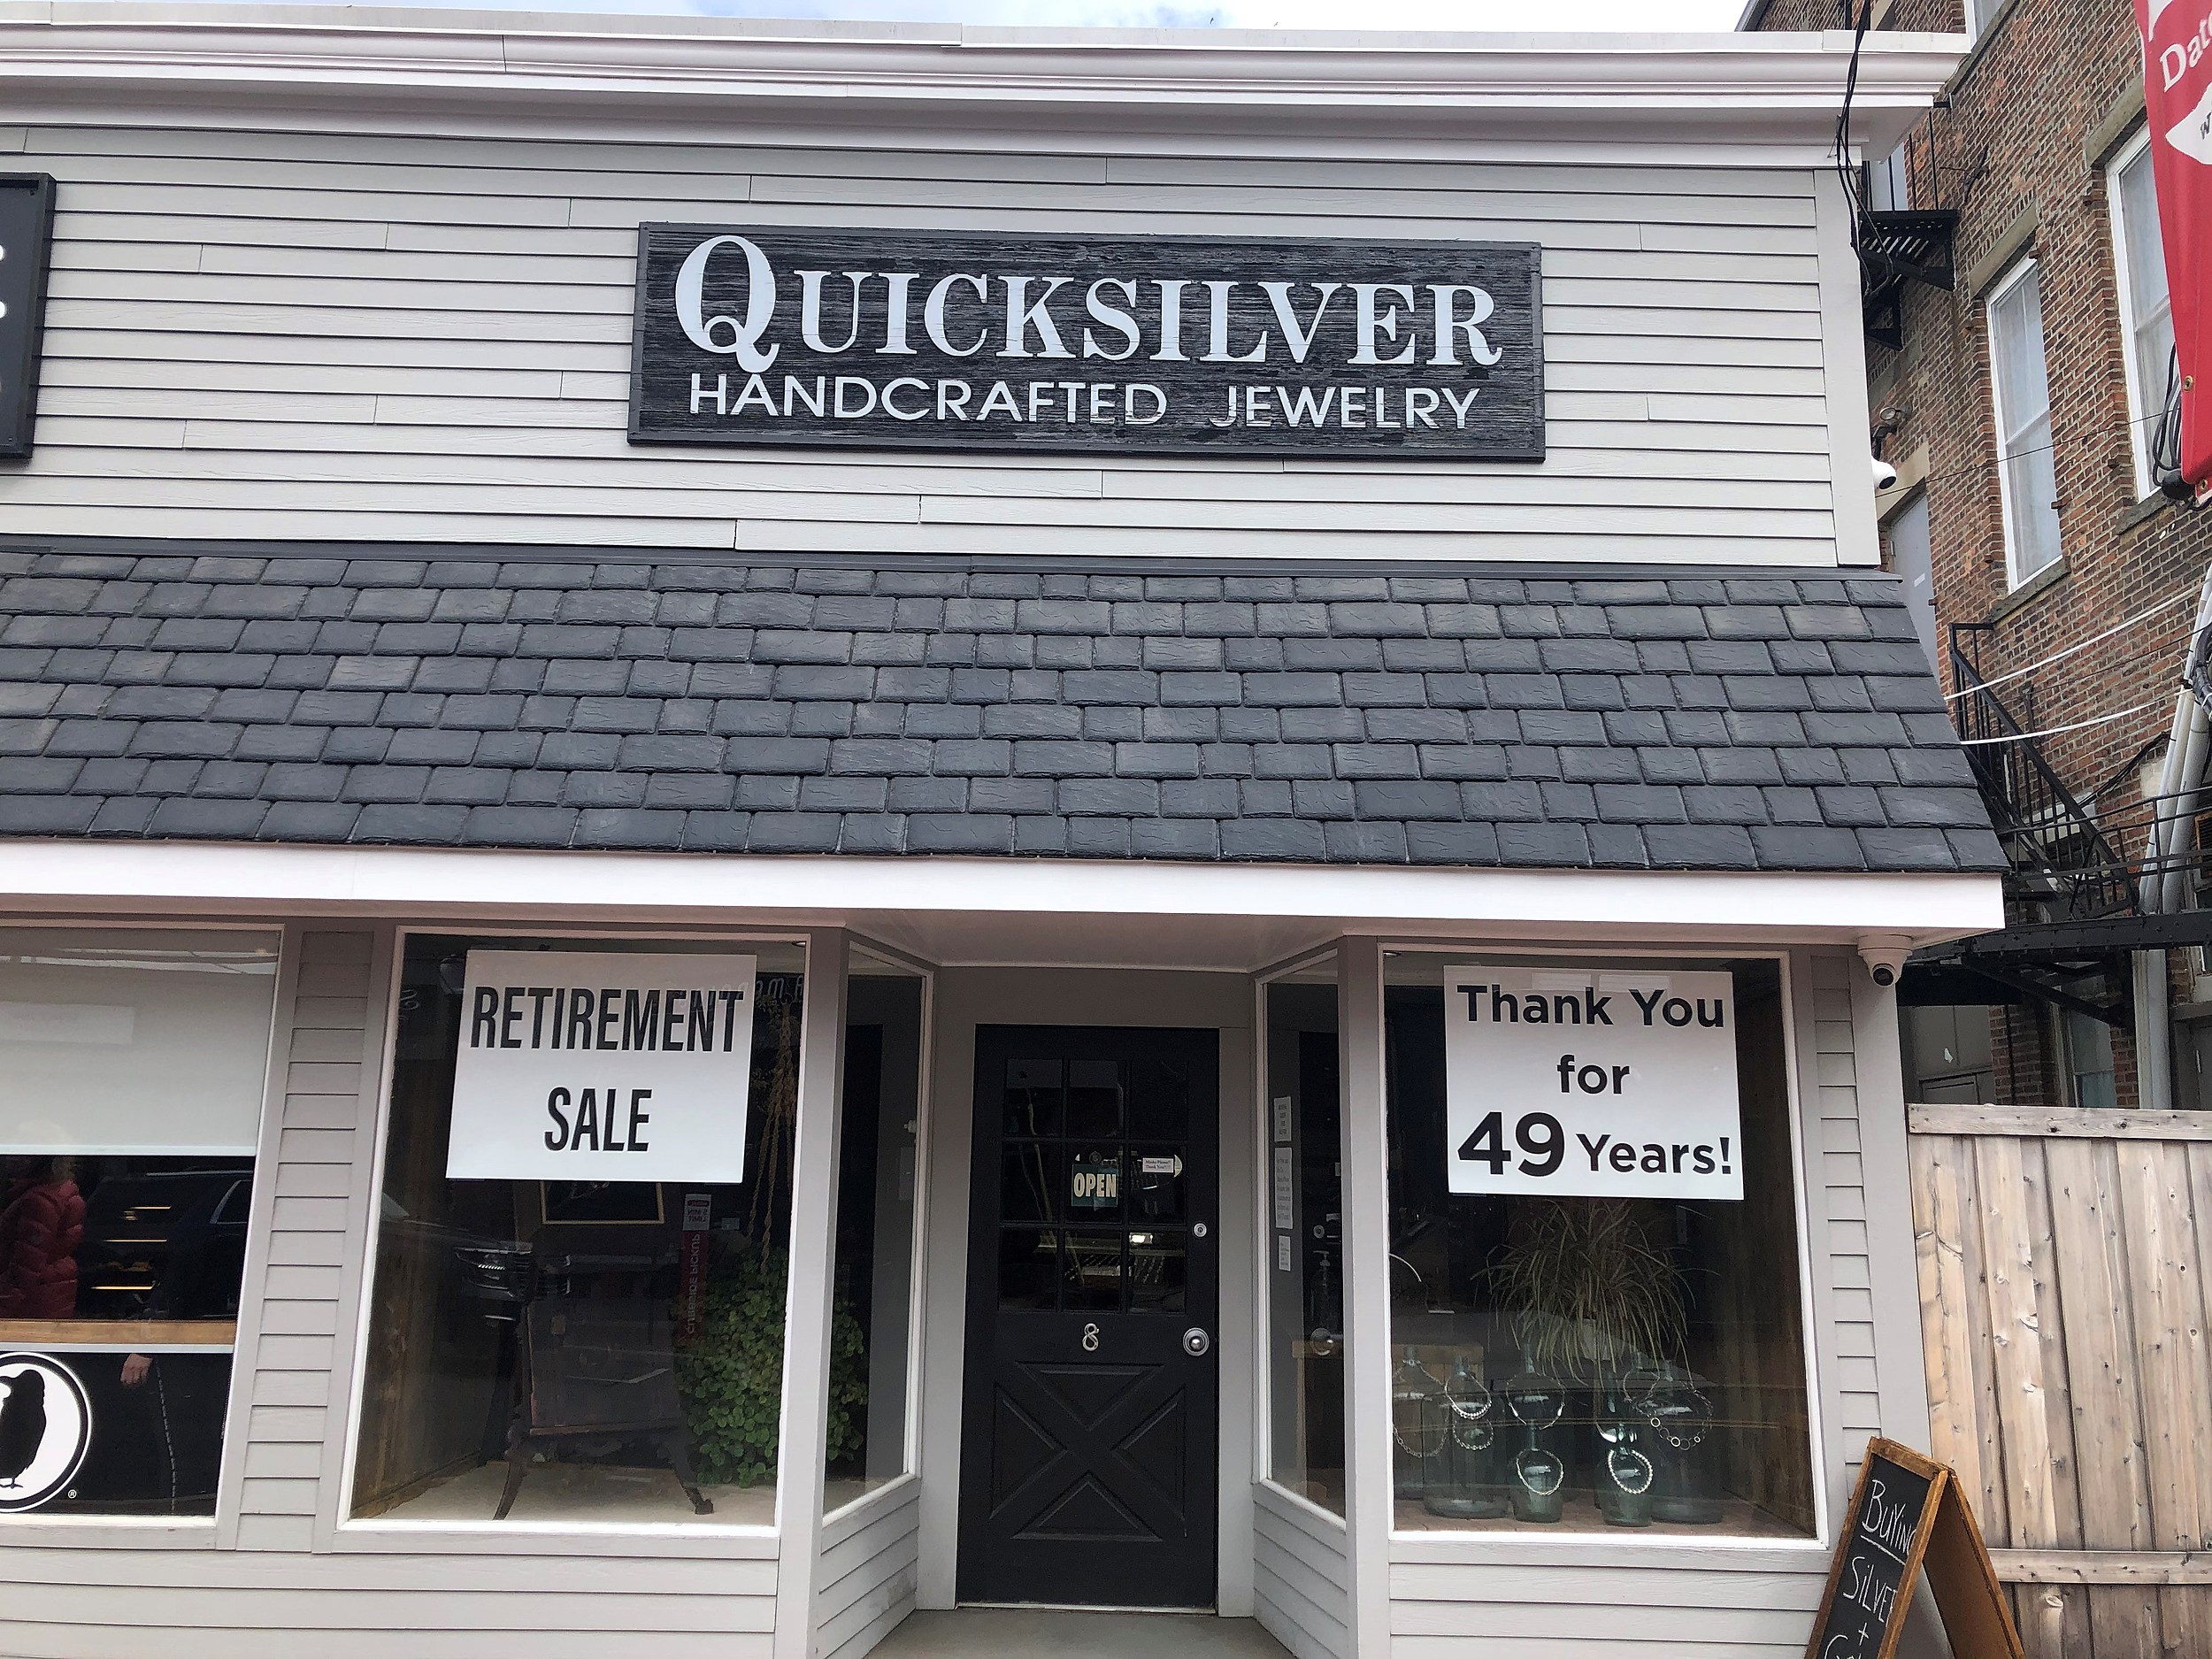 closing Quicksilver Bank Red 49 after in jewelry shop years